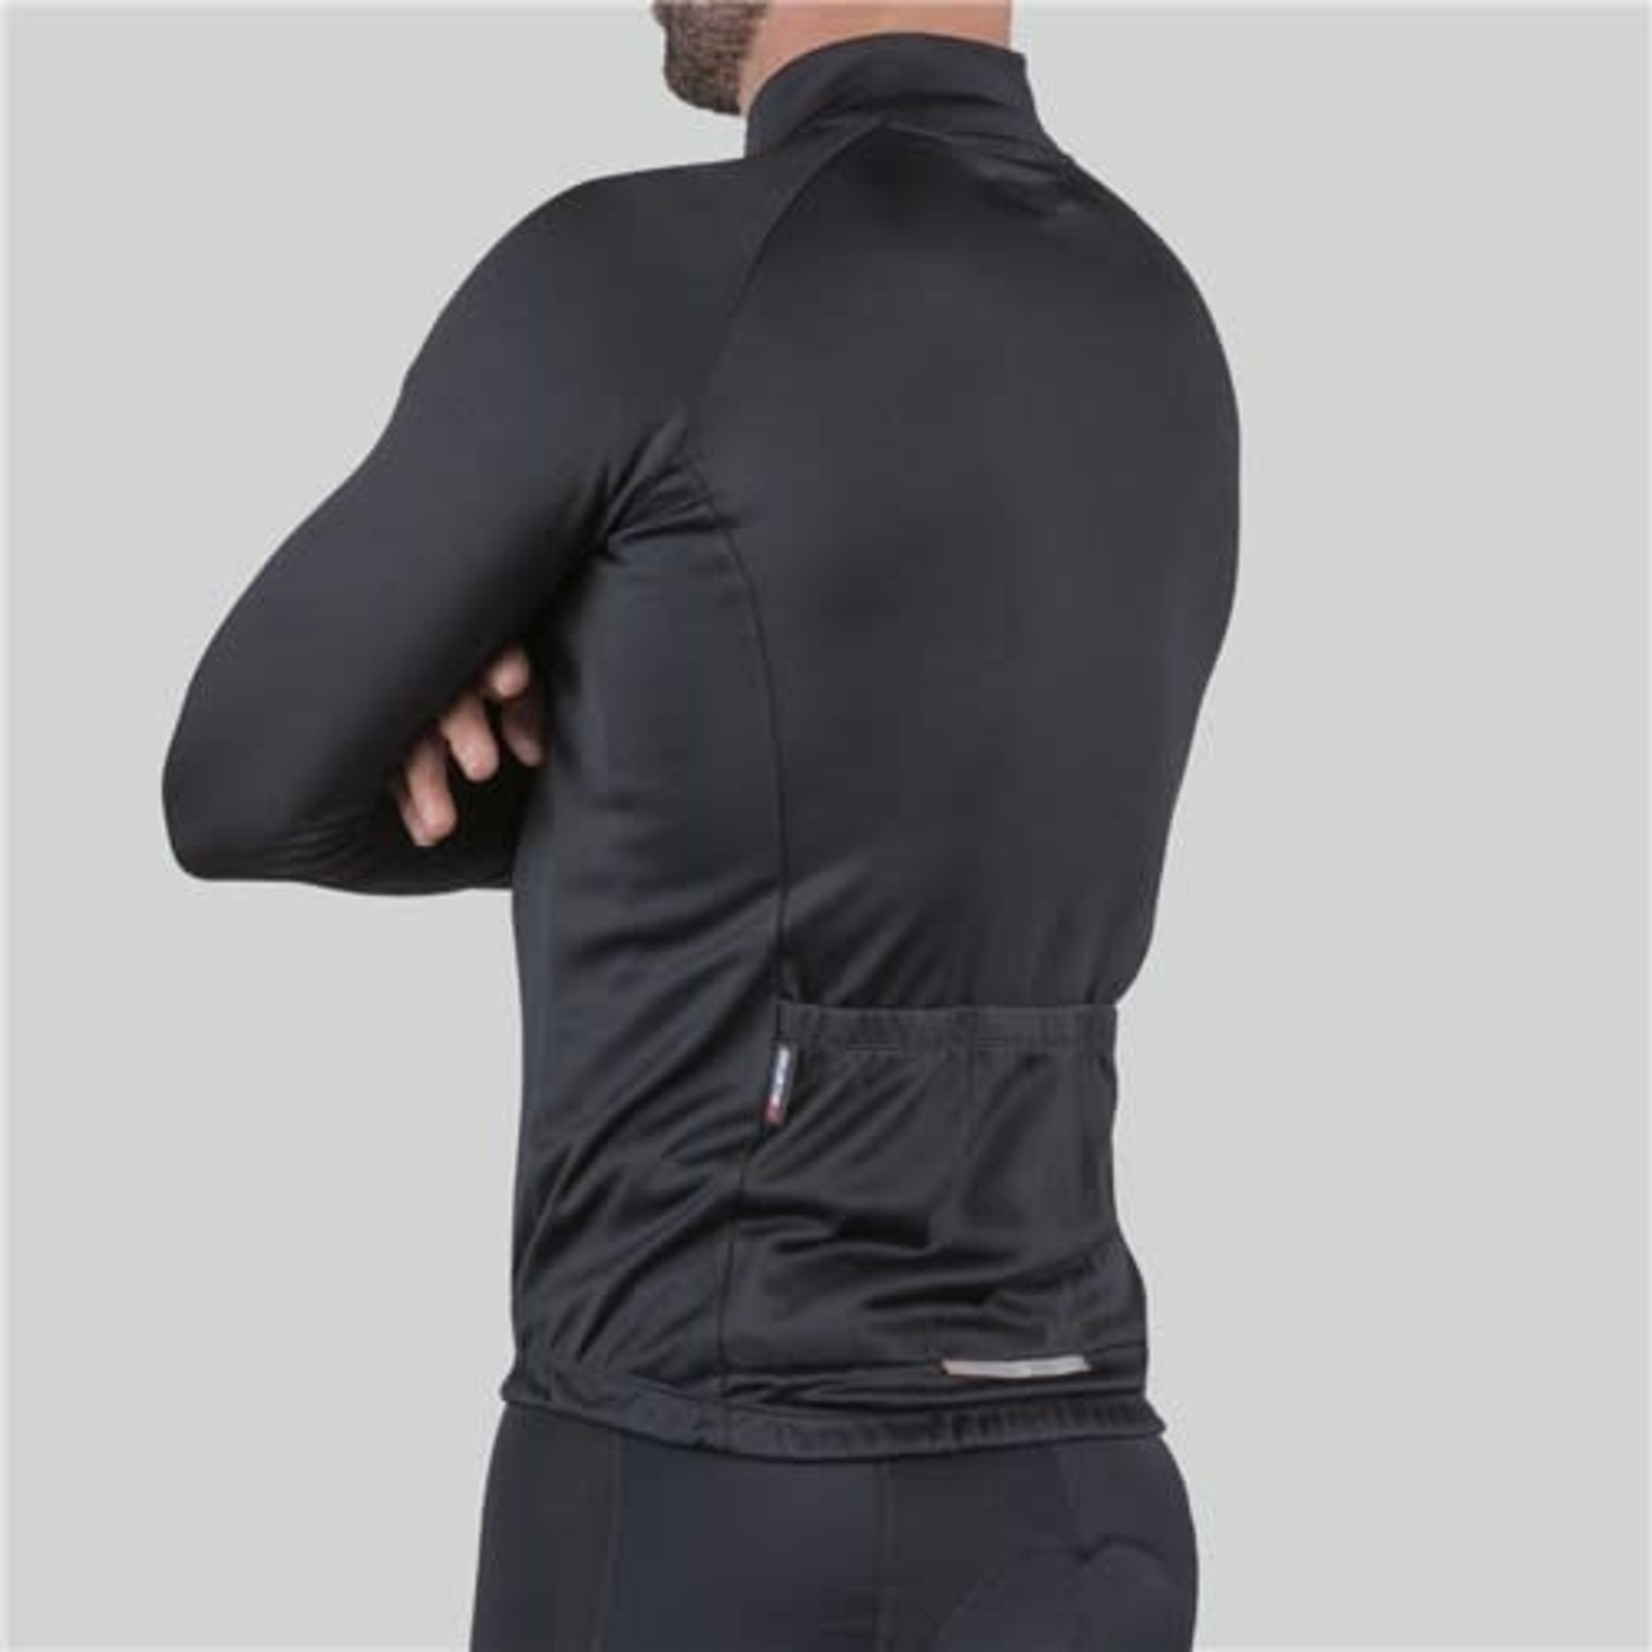 Bellwether Bellwether Thermal Draft Men's Semi-Fitted Long Sleeve Jersey - Black